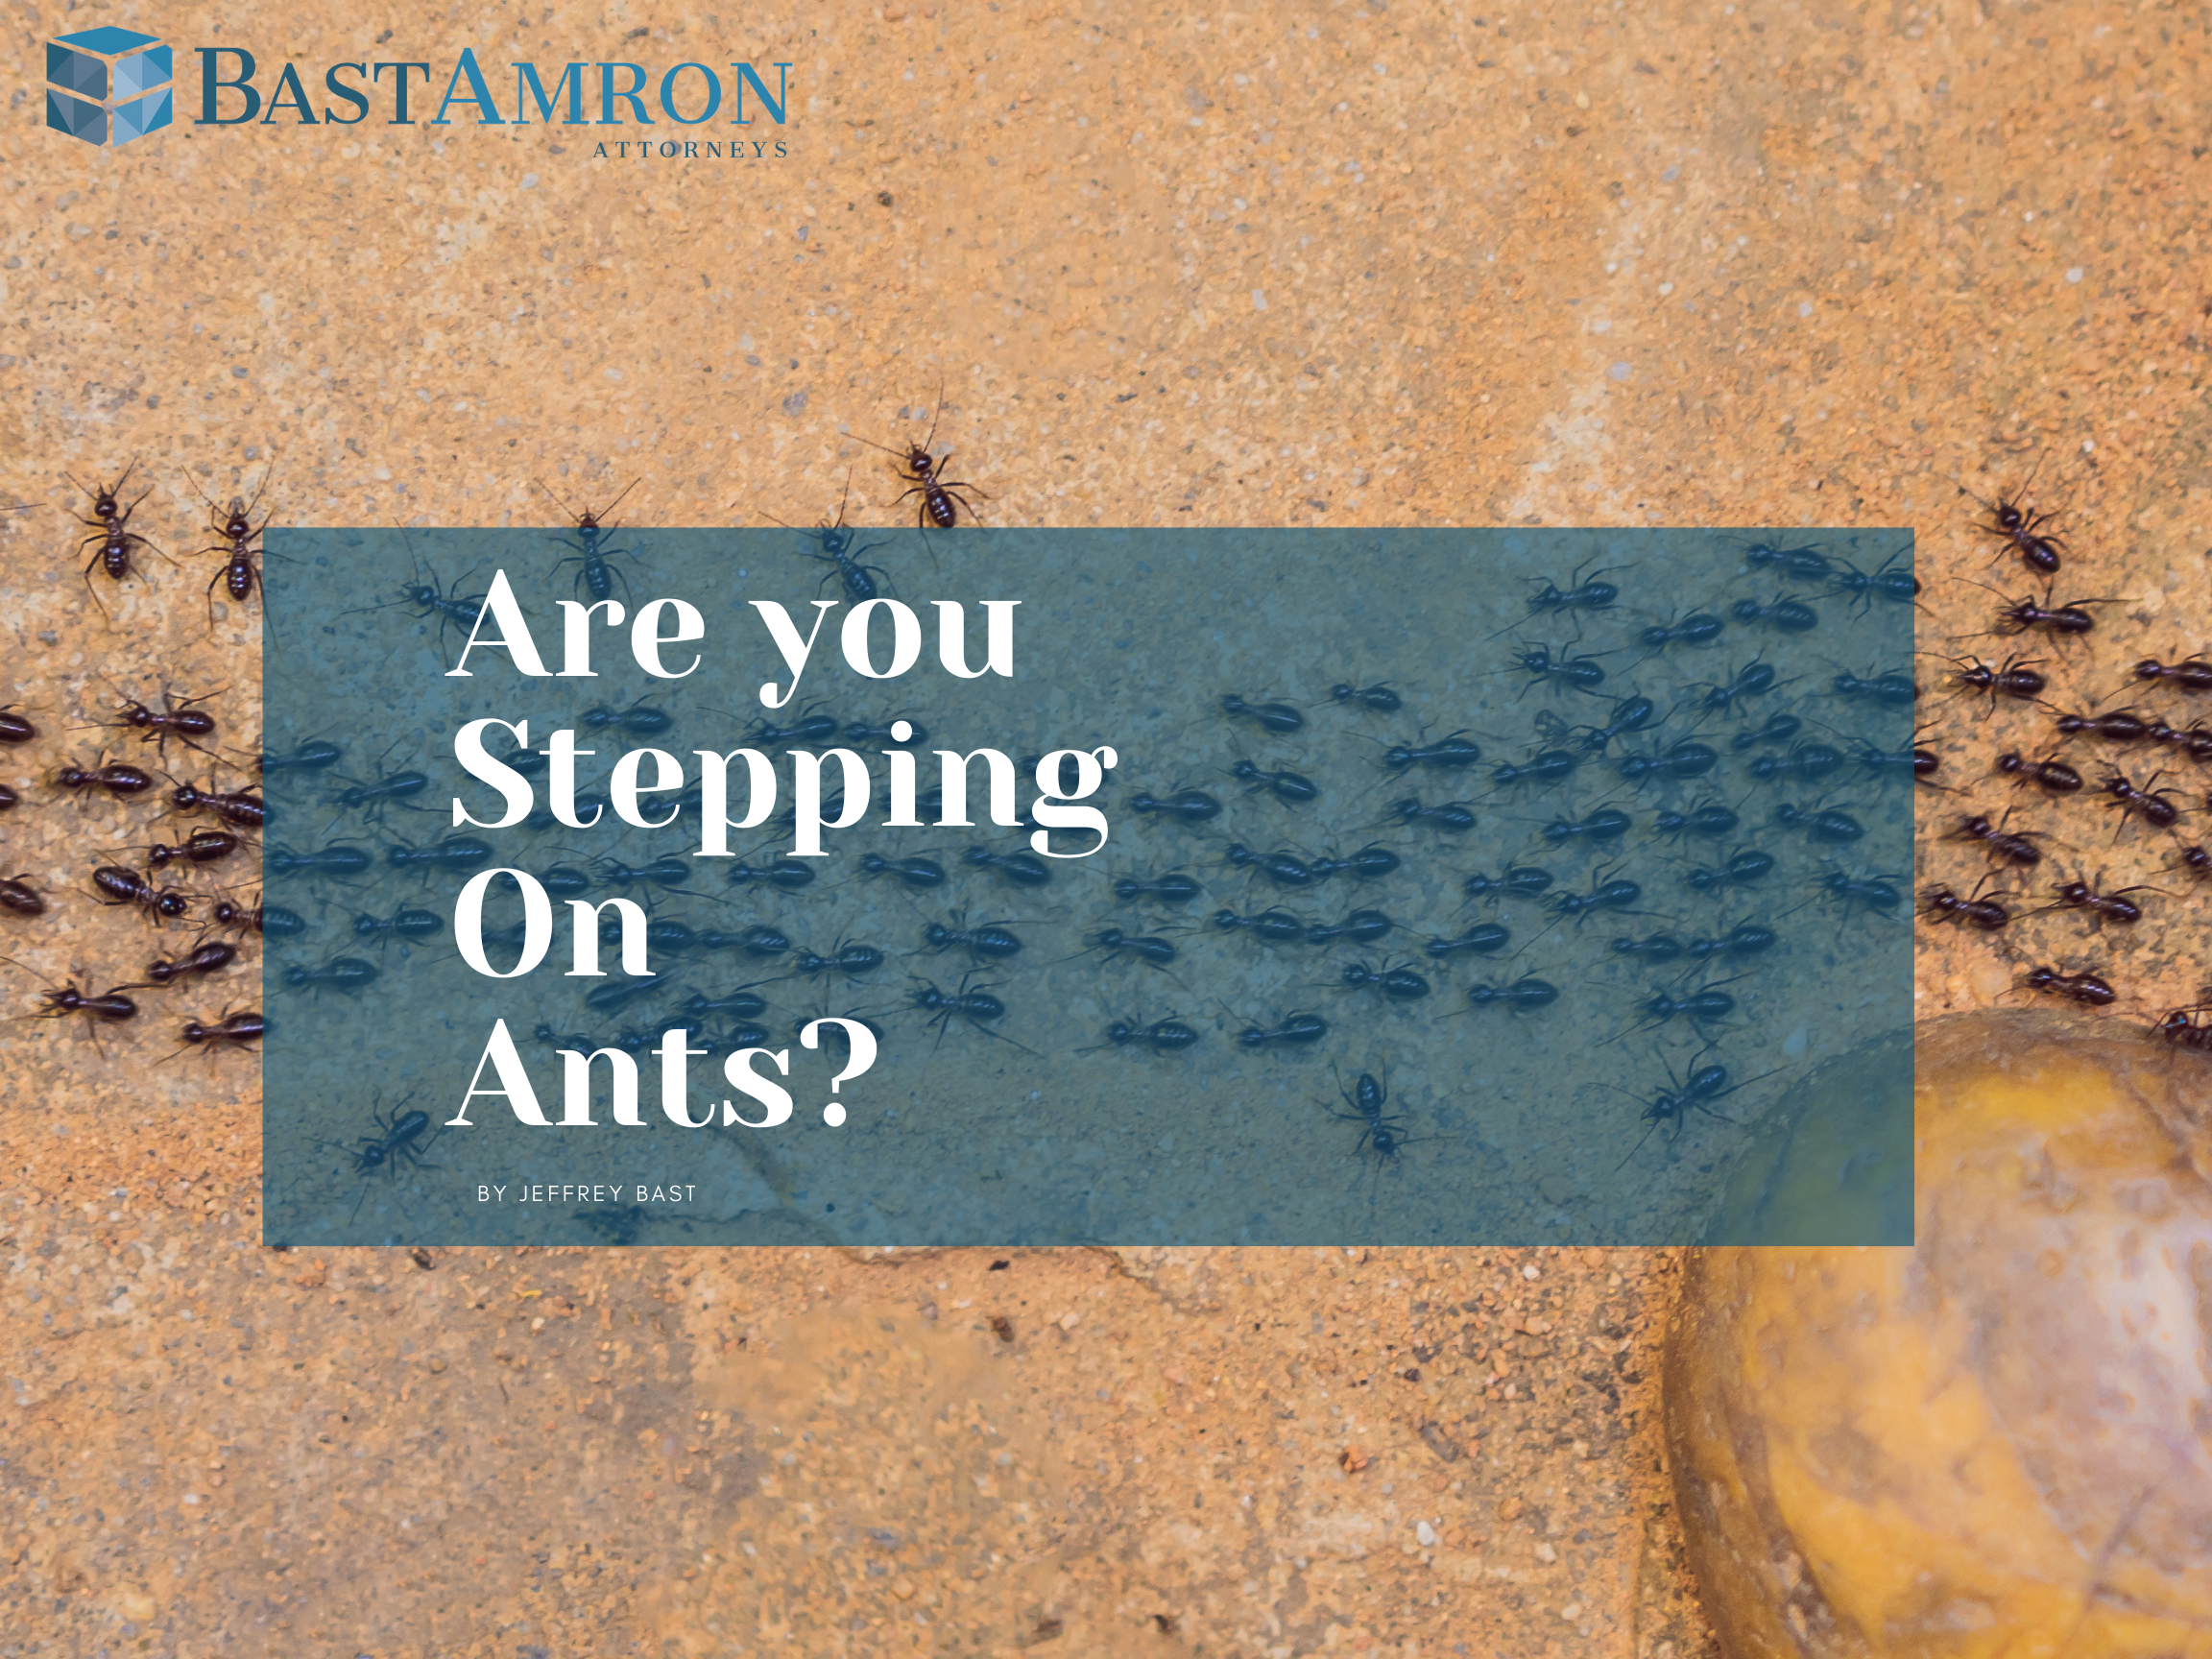 Are you stepping on ants?